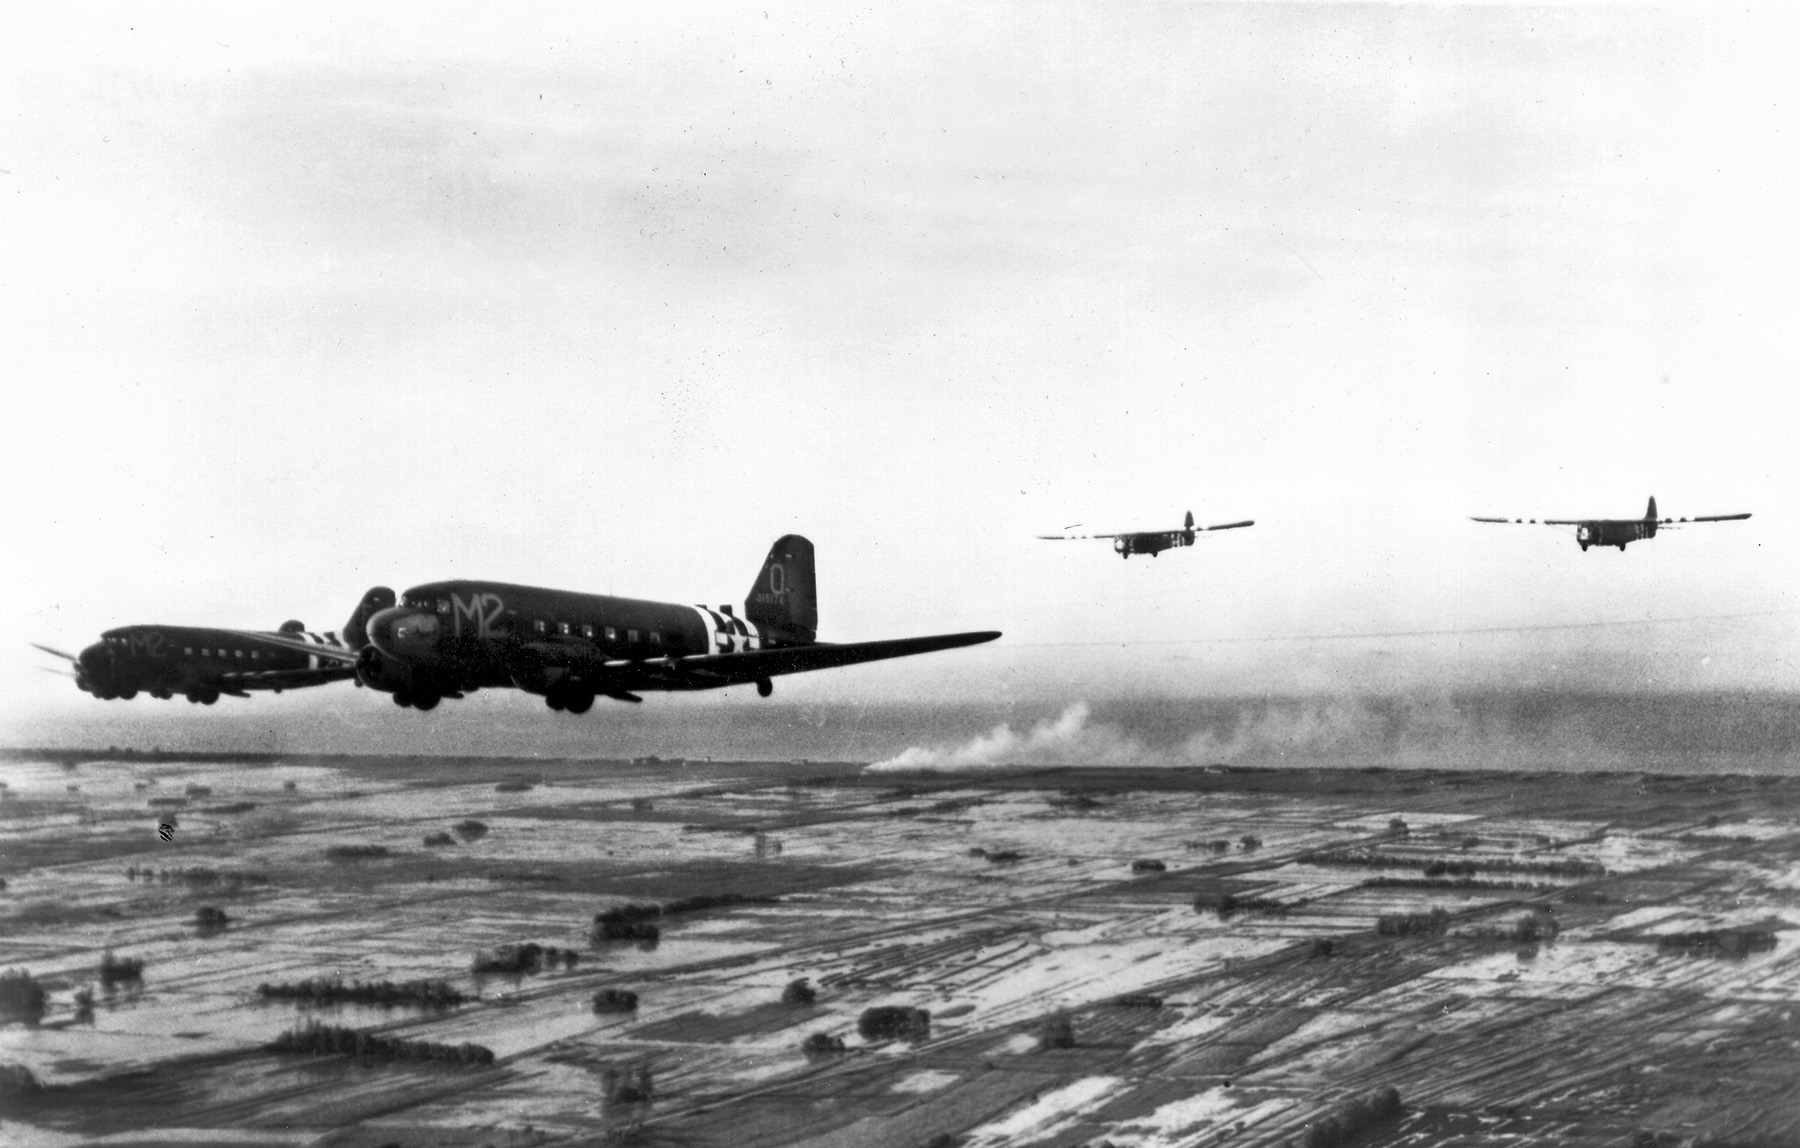 These C-47A aircraft are pictured towing gliders in the skies above Normandy in June 1944. The C-47 was widely used for this purpose and to deliver paratroopers during airborne operations in Europe and the Pacific.